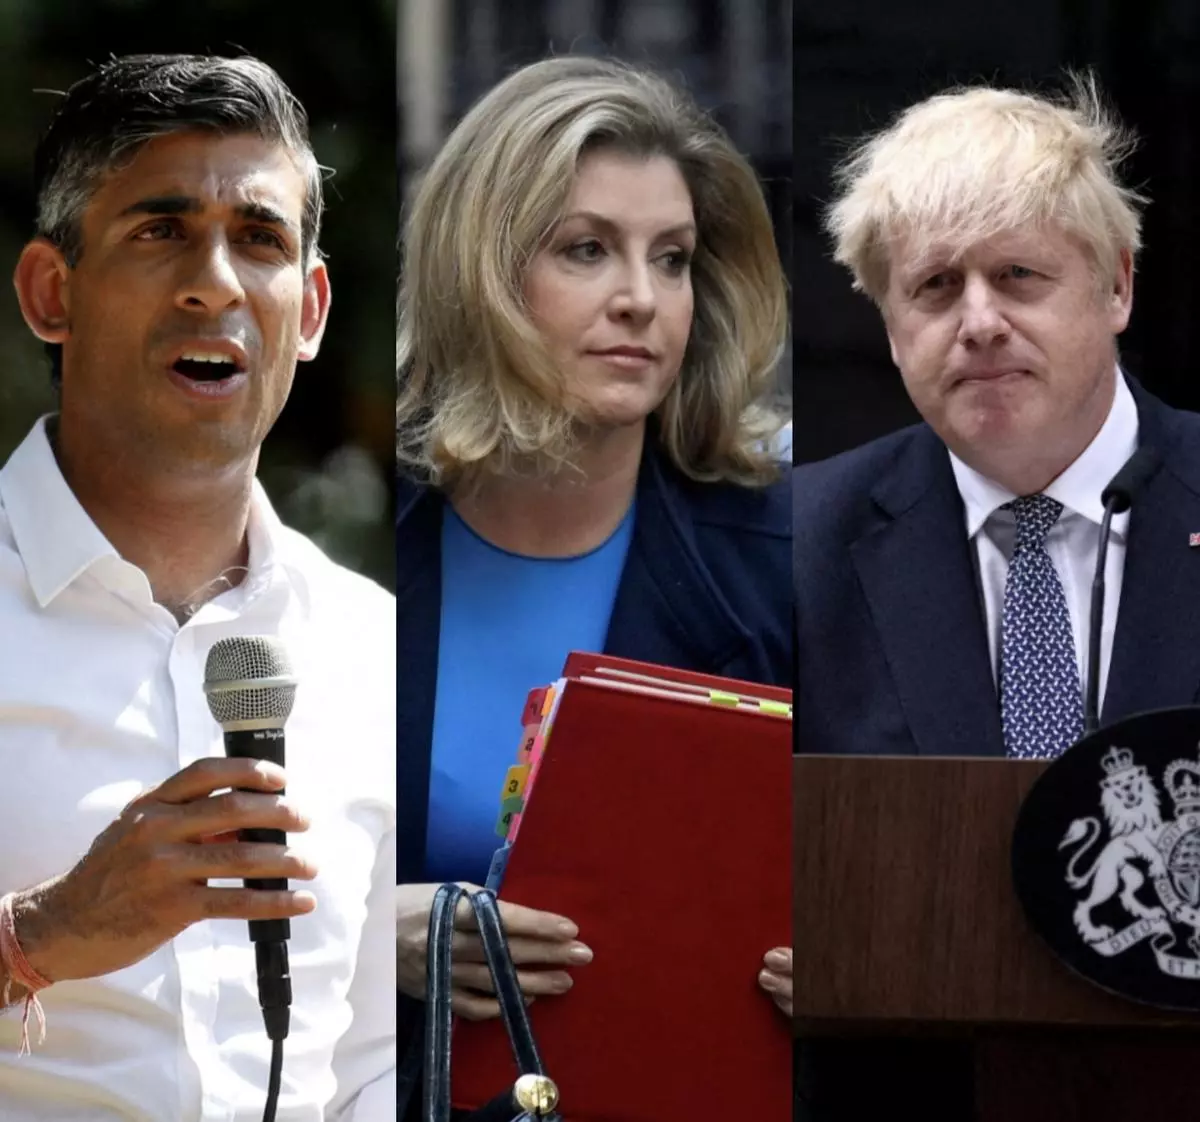 File Photo: Rishi Sunak, Former Treasury Chief; Penny Mordaunt, House of Commons leader; and Boris Johnson, Former Prime Minister